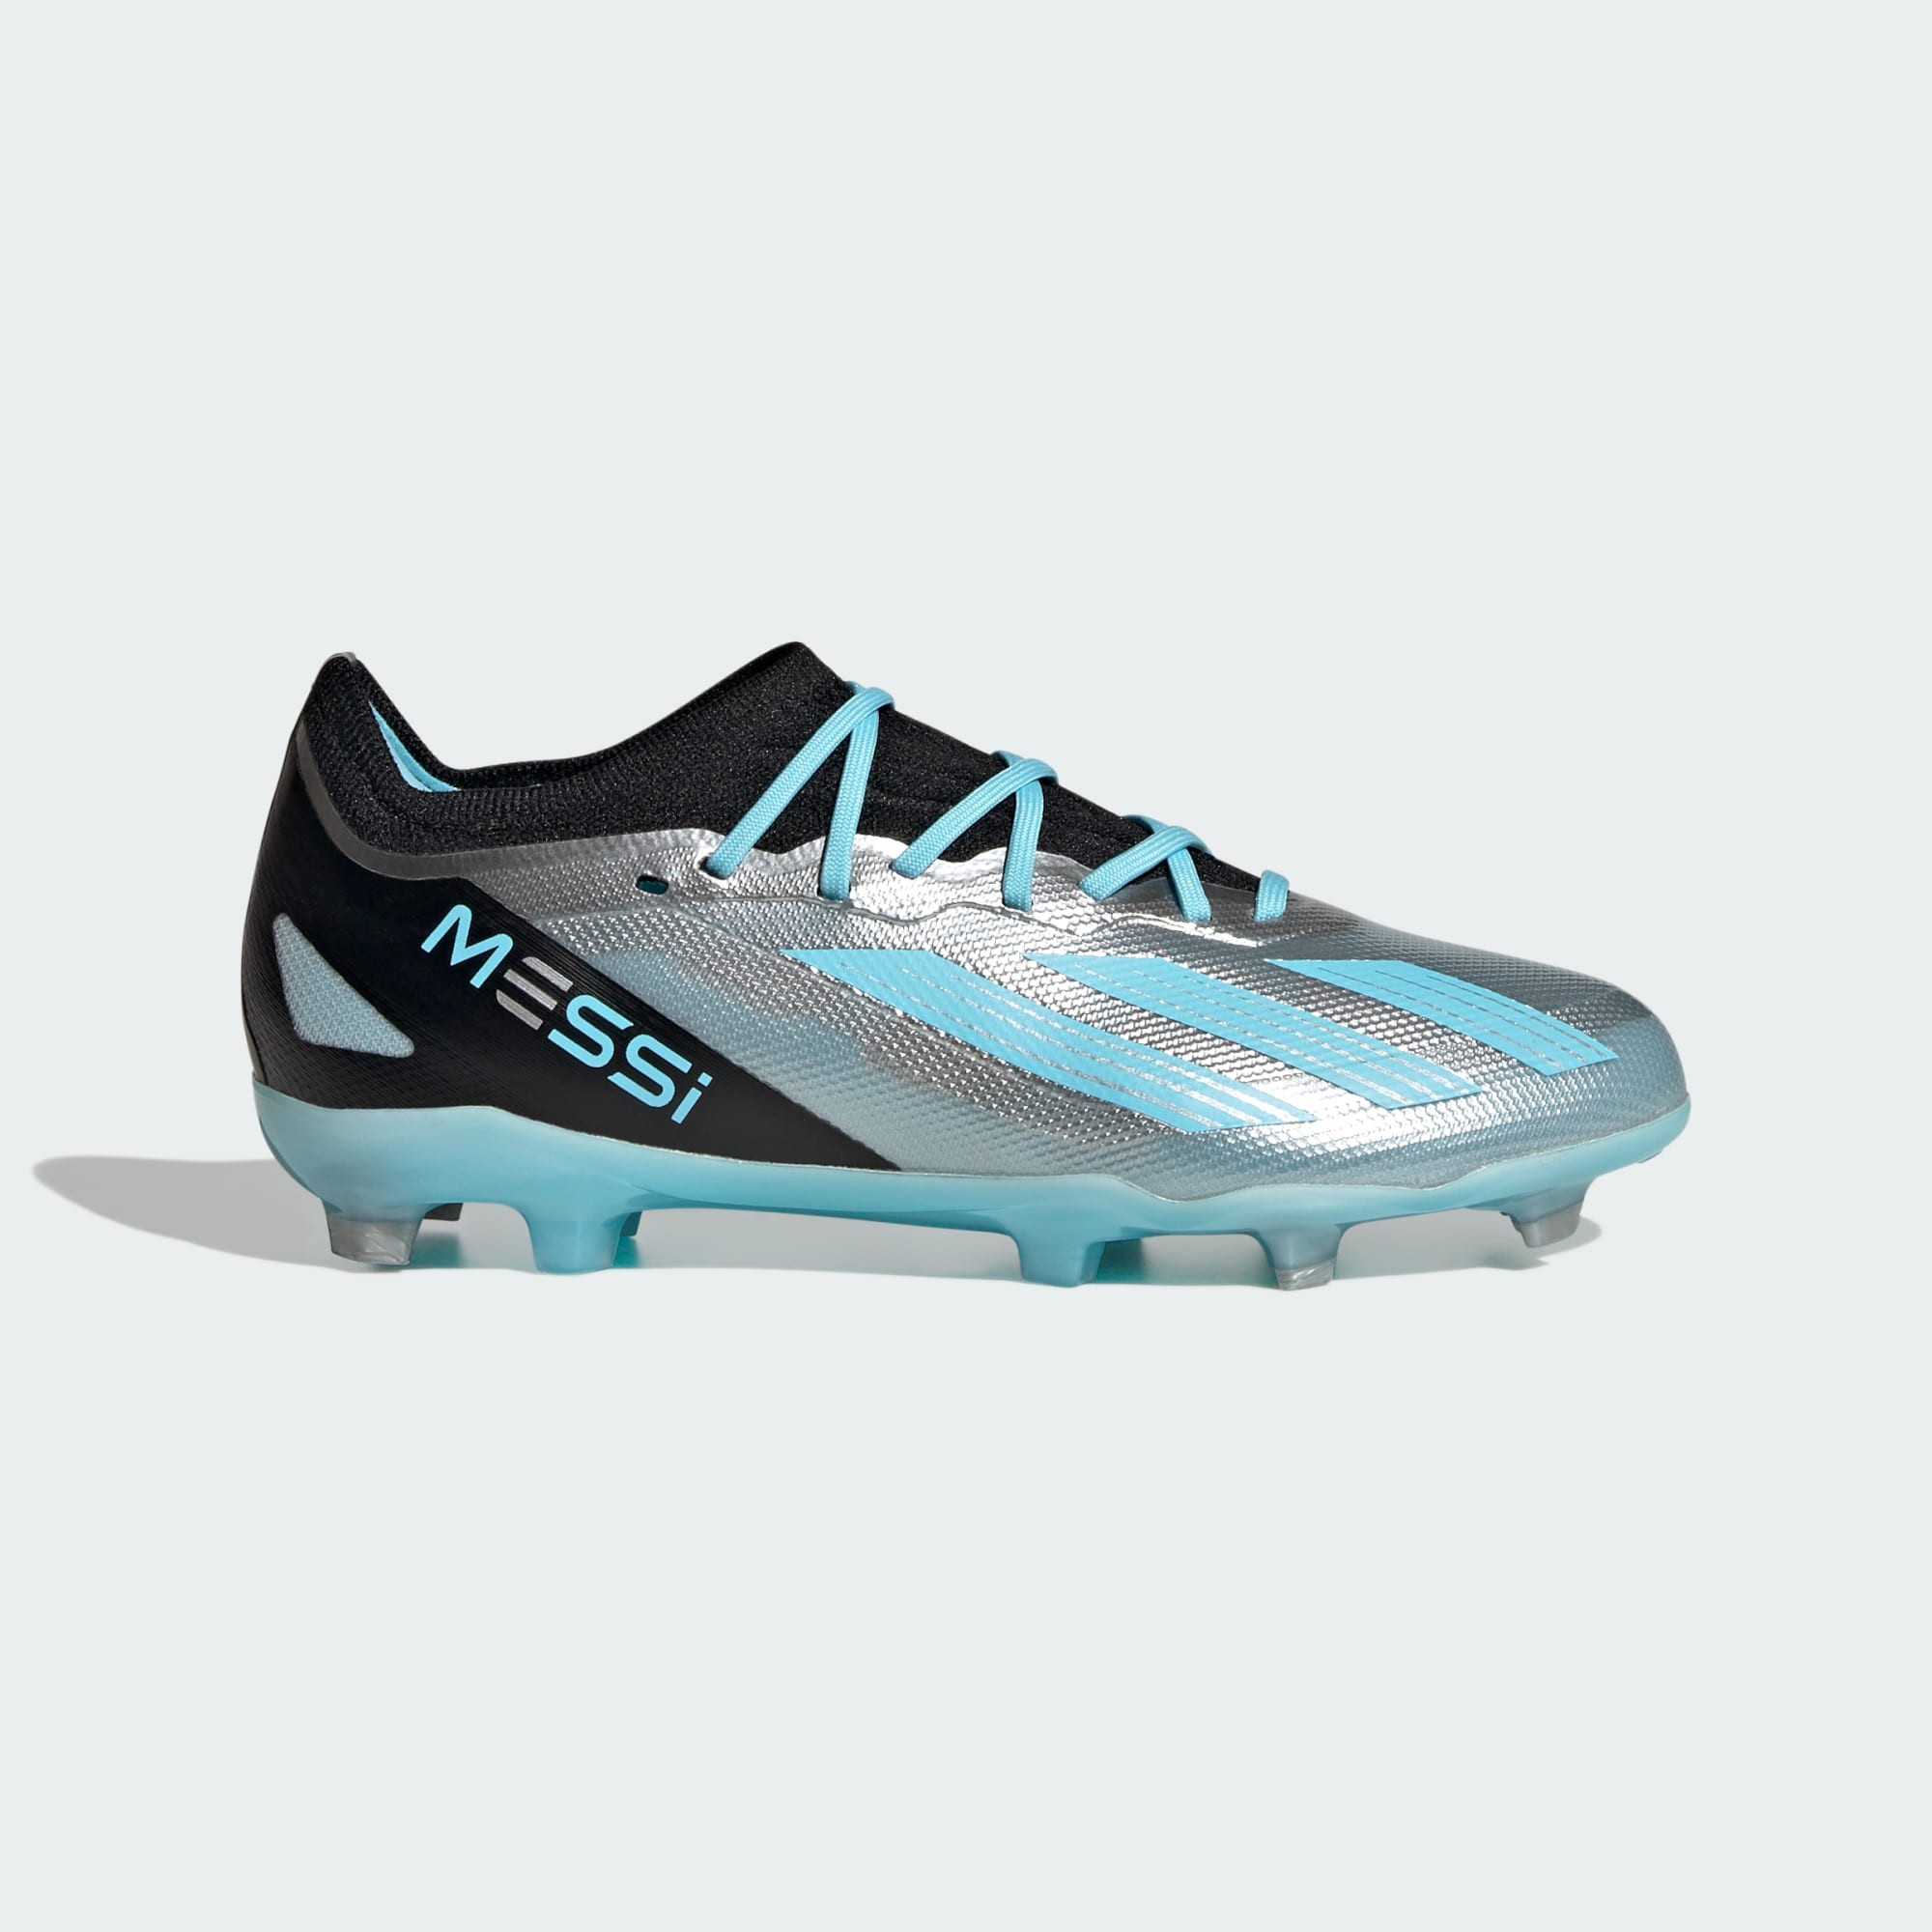 Newest Speedmate Branches Soccer Shoes 39-45 FG Mercurial Superfly 360 Football  Boots Messi mercurial vapor 12 Futsal Sneakers - buy Newest Speedmate  Branches Soccer Shoes 39-45 FG Mercurial Superfly 360 Football Boots